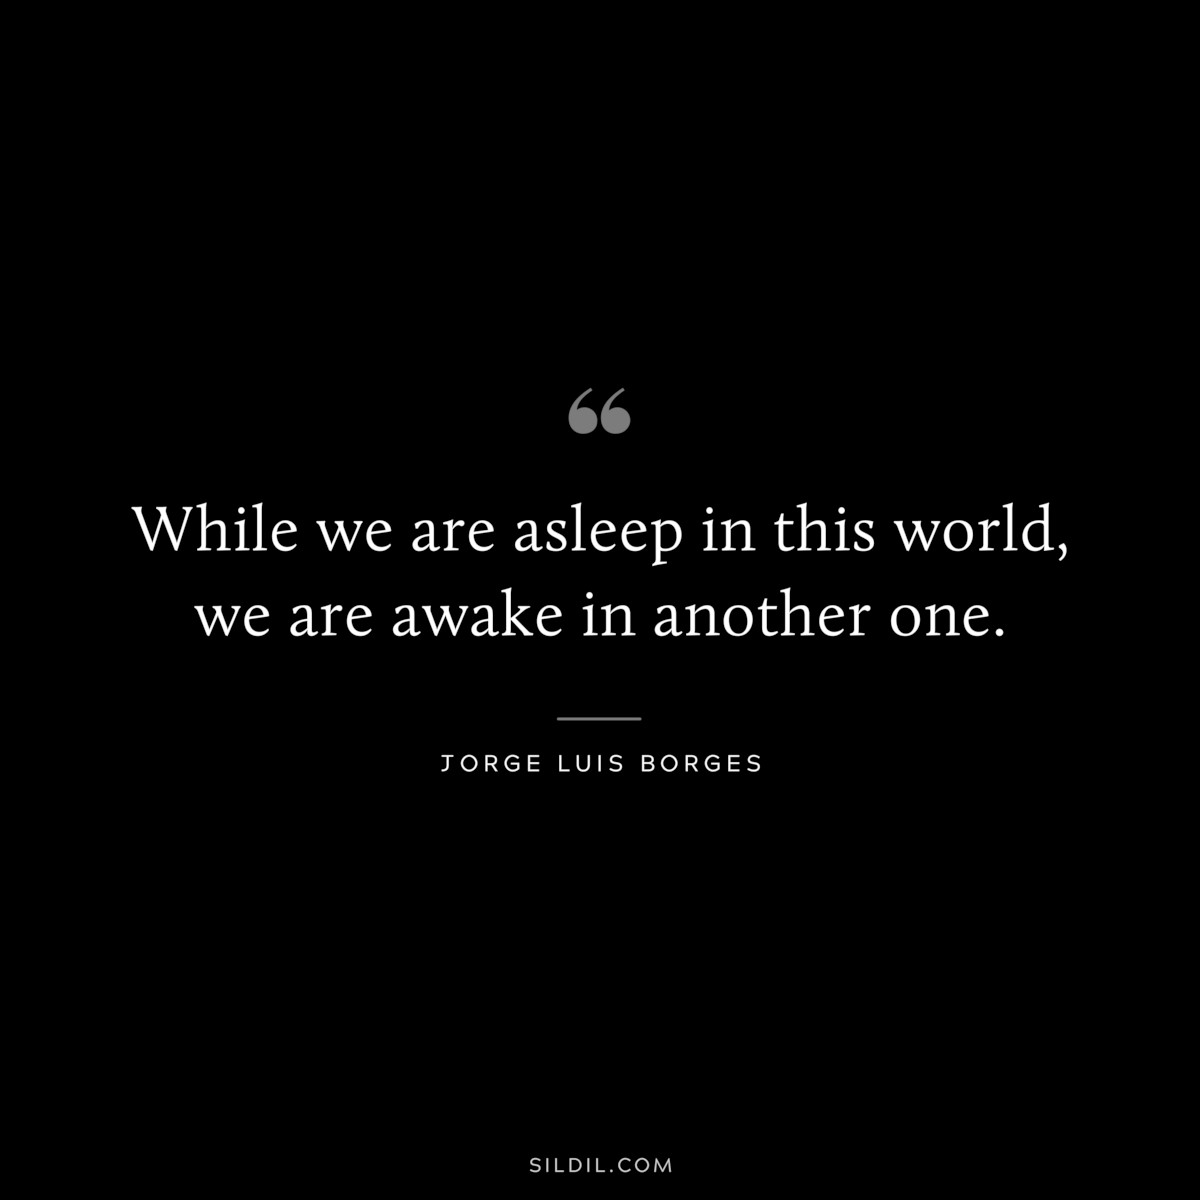 While we are asleep in this world, we are awake in another one. ― Jorge Luis Borges